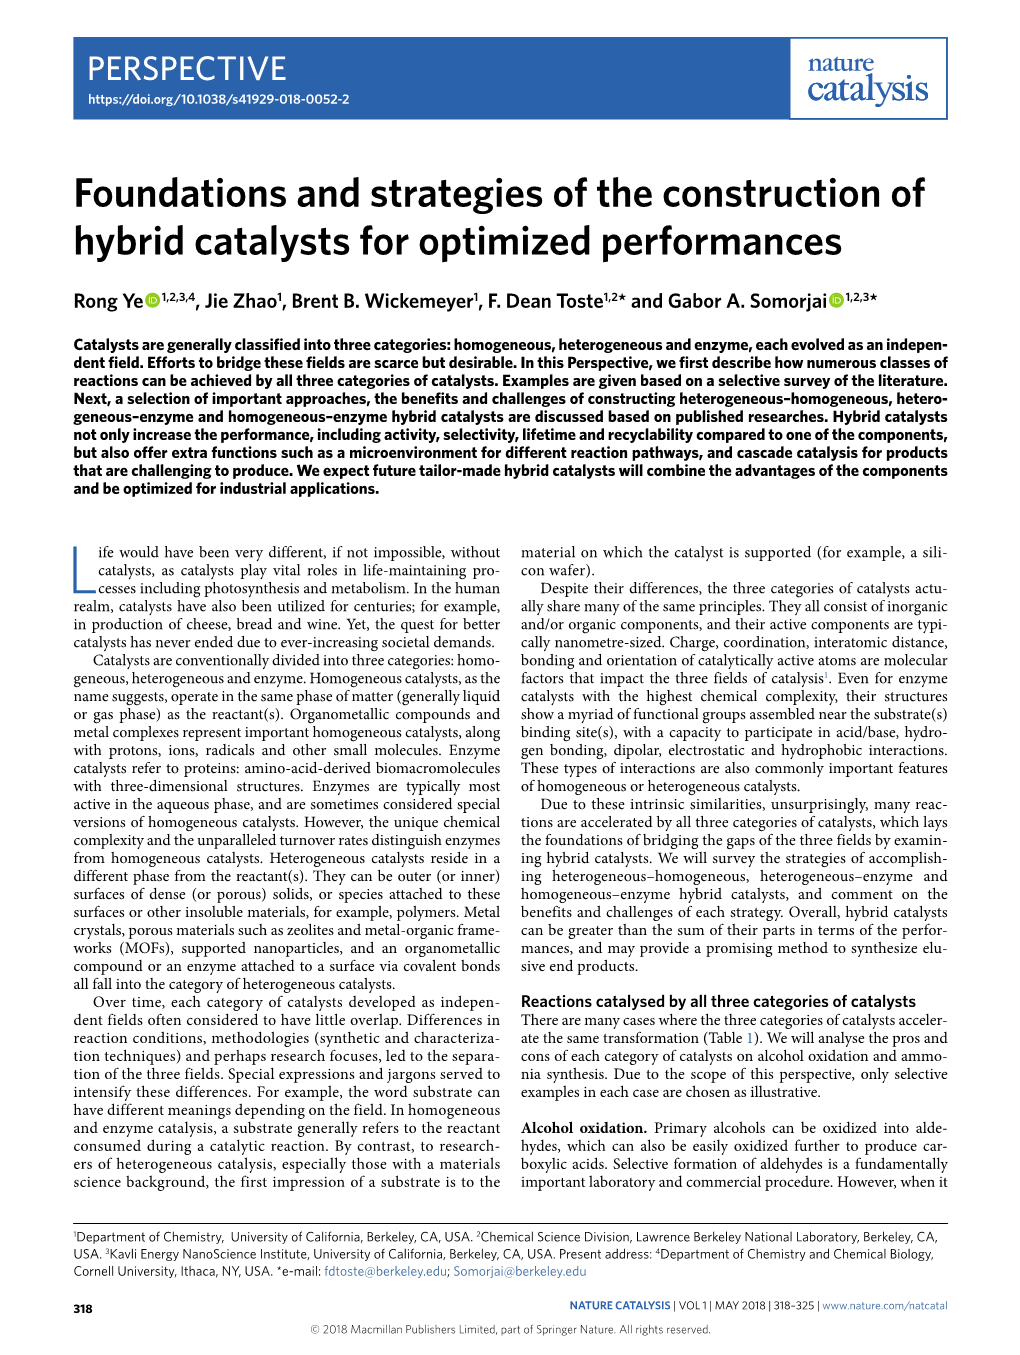 Foundations and Strategies of the Construction of Hybrid Catalysts for Optimized Performances